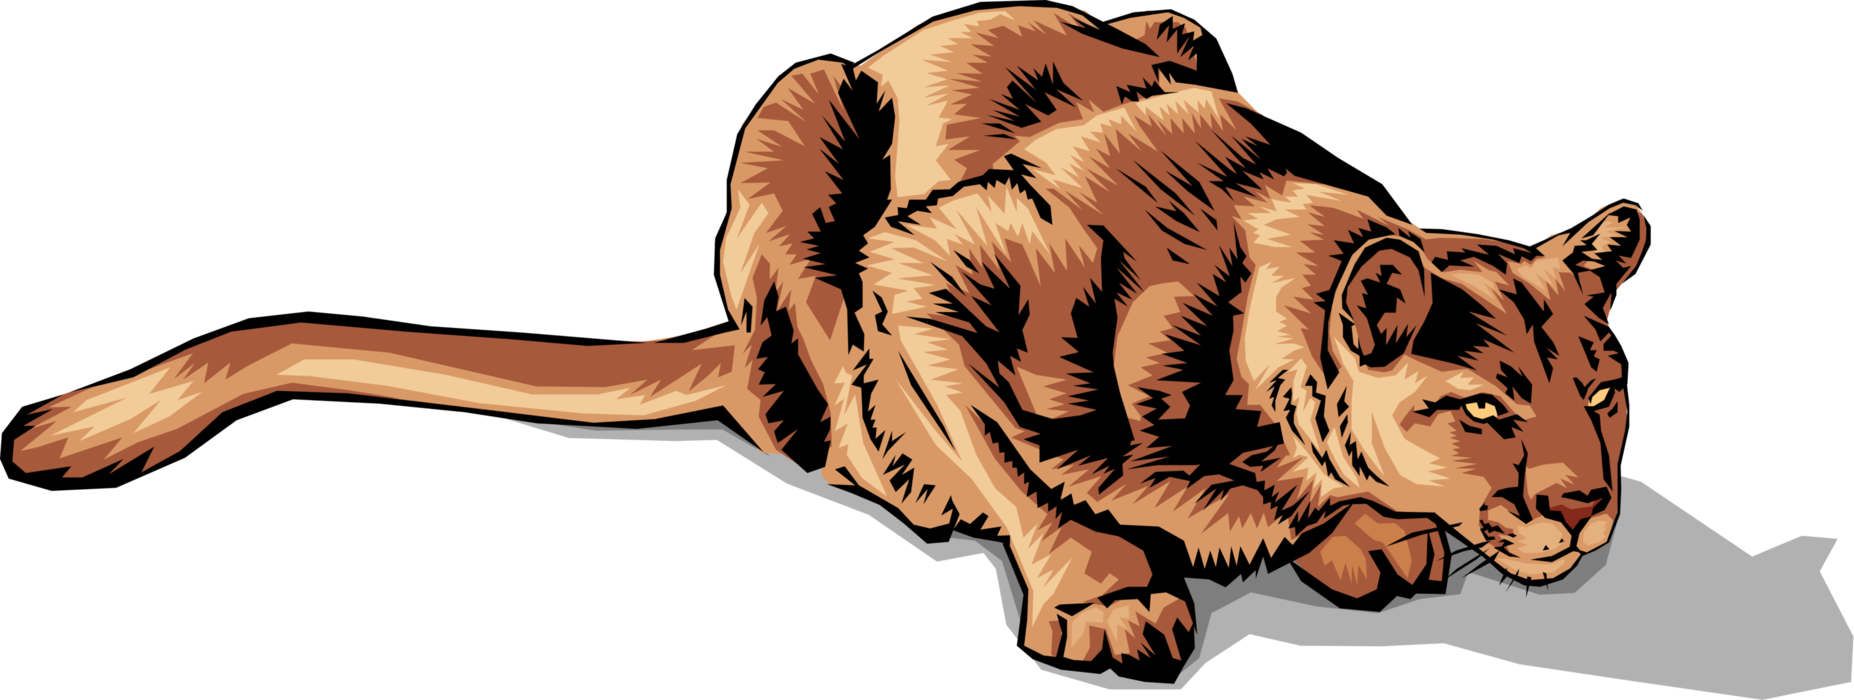 Vector Illustration of Large Carnivore African Lioness Cat Ready to Pounce